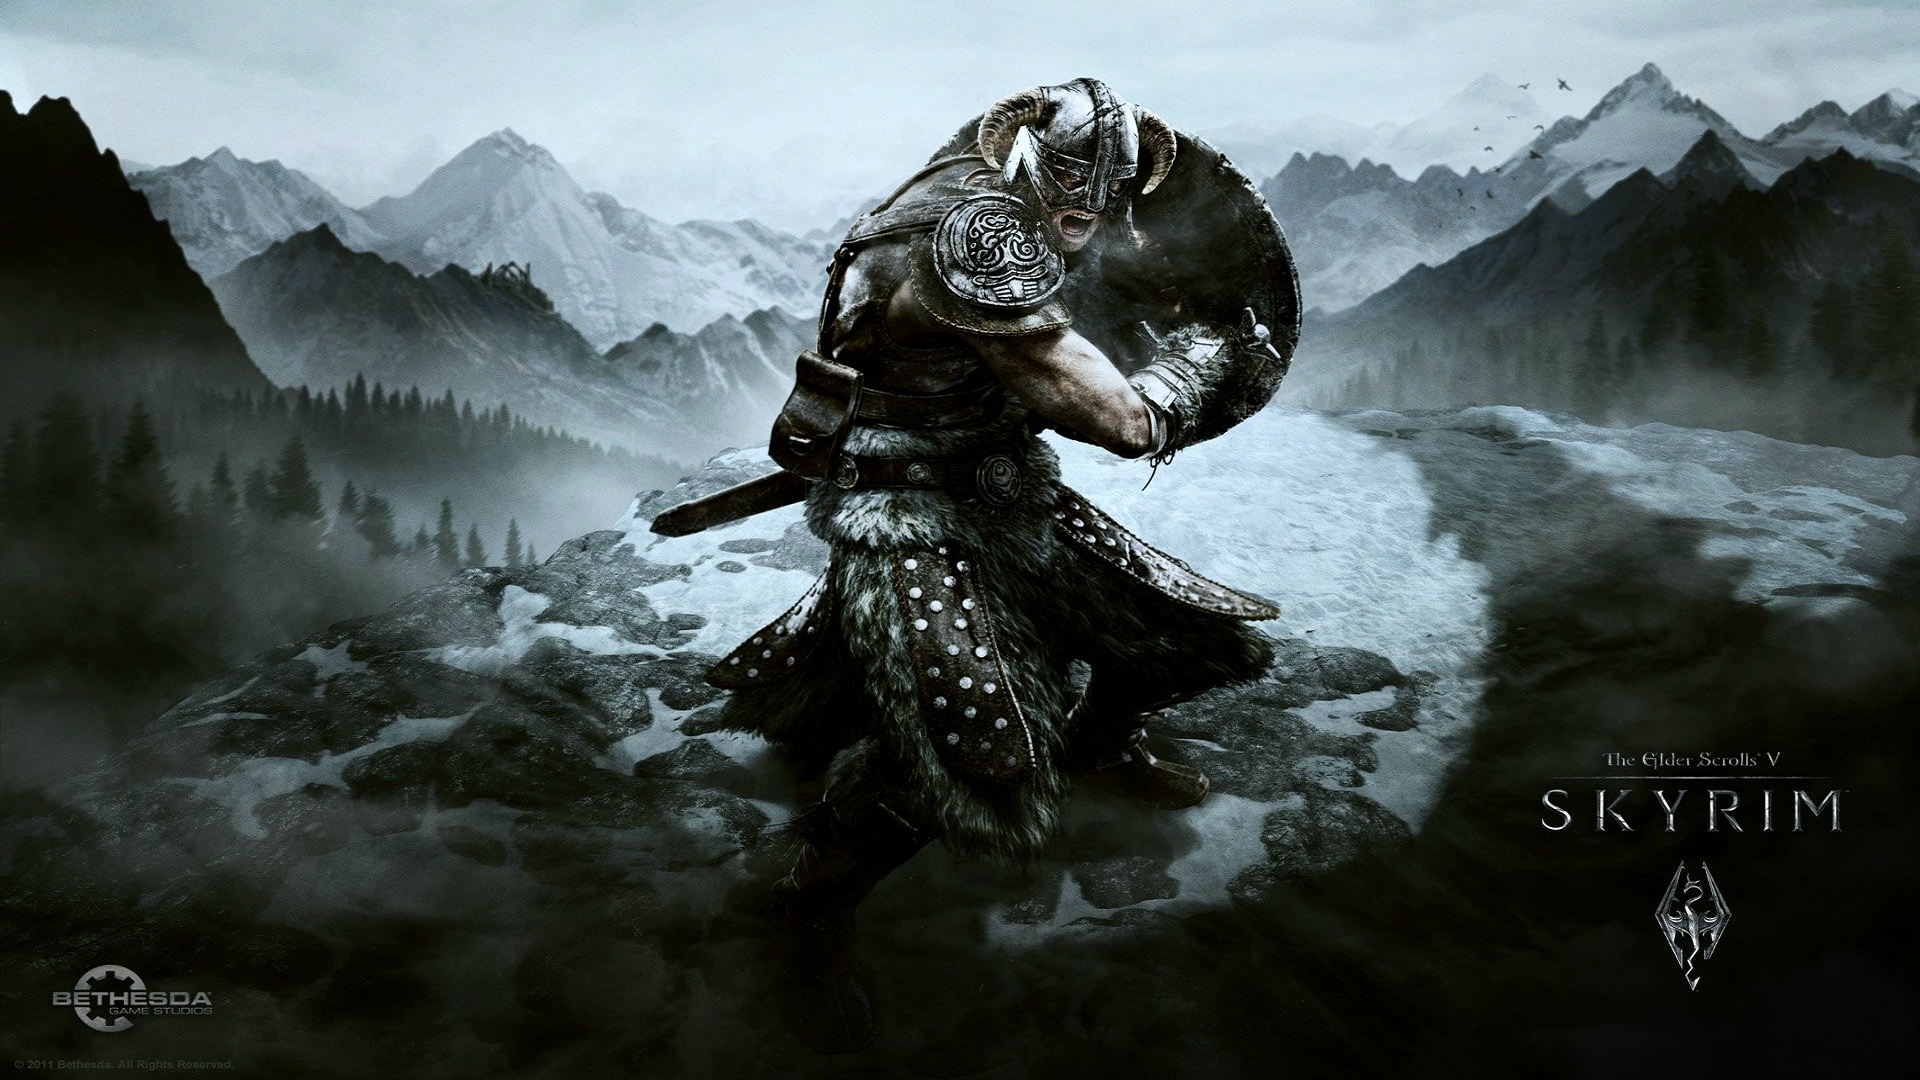 Here Are Few HD Wallpaper From The New Game Elder Scrolls V